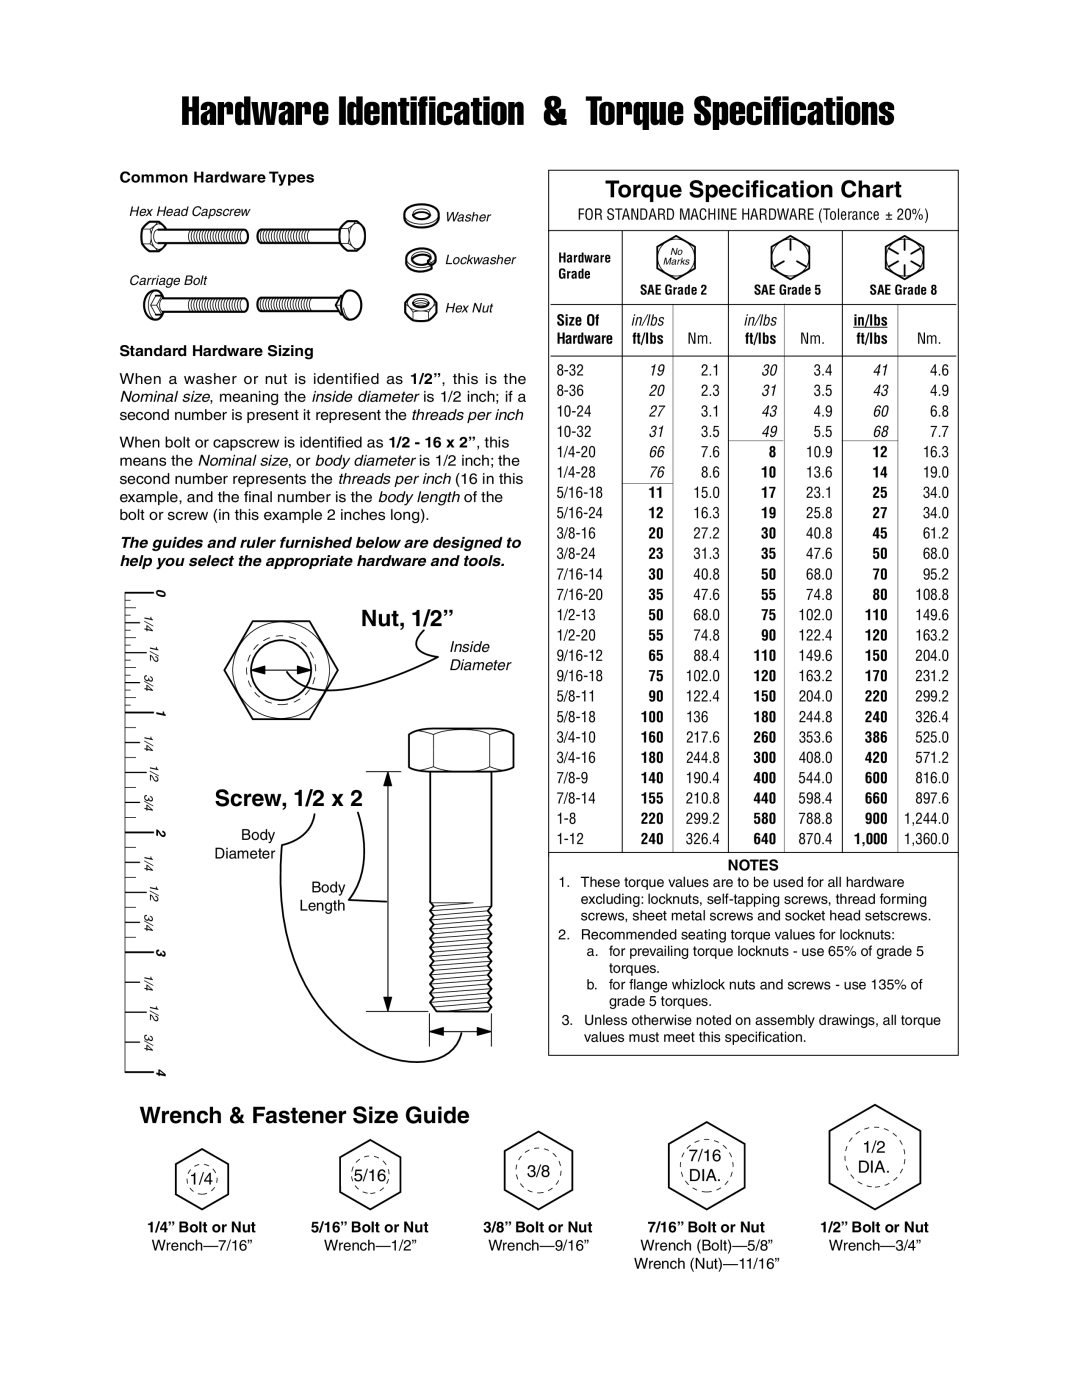 Snapper 4549 Wrench & Fastener Size Guide, Common Hardware Types, Standard Hardware Sizing, 1/4” Bolt or Nut, Nut, 1/2” 